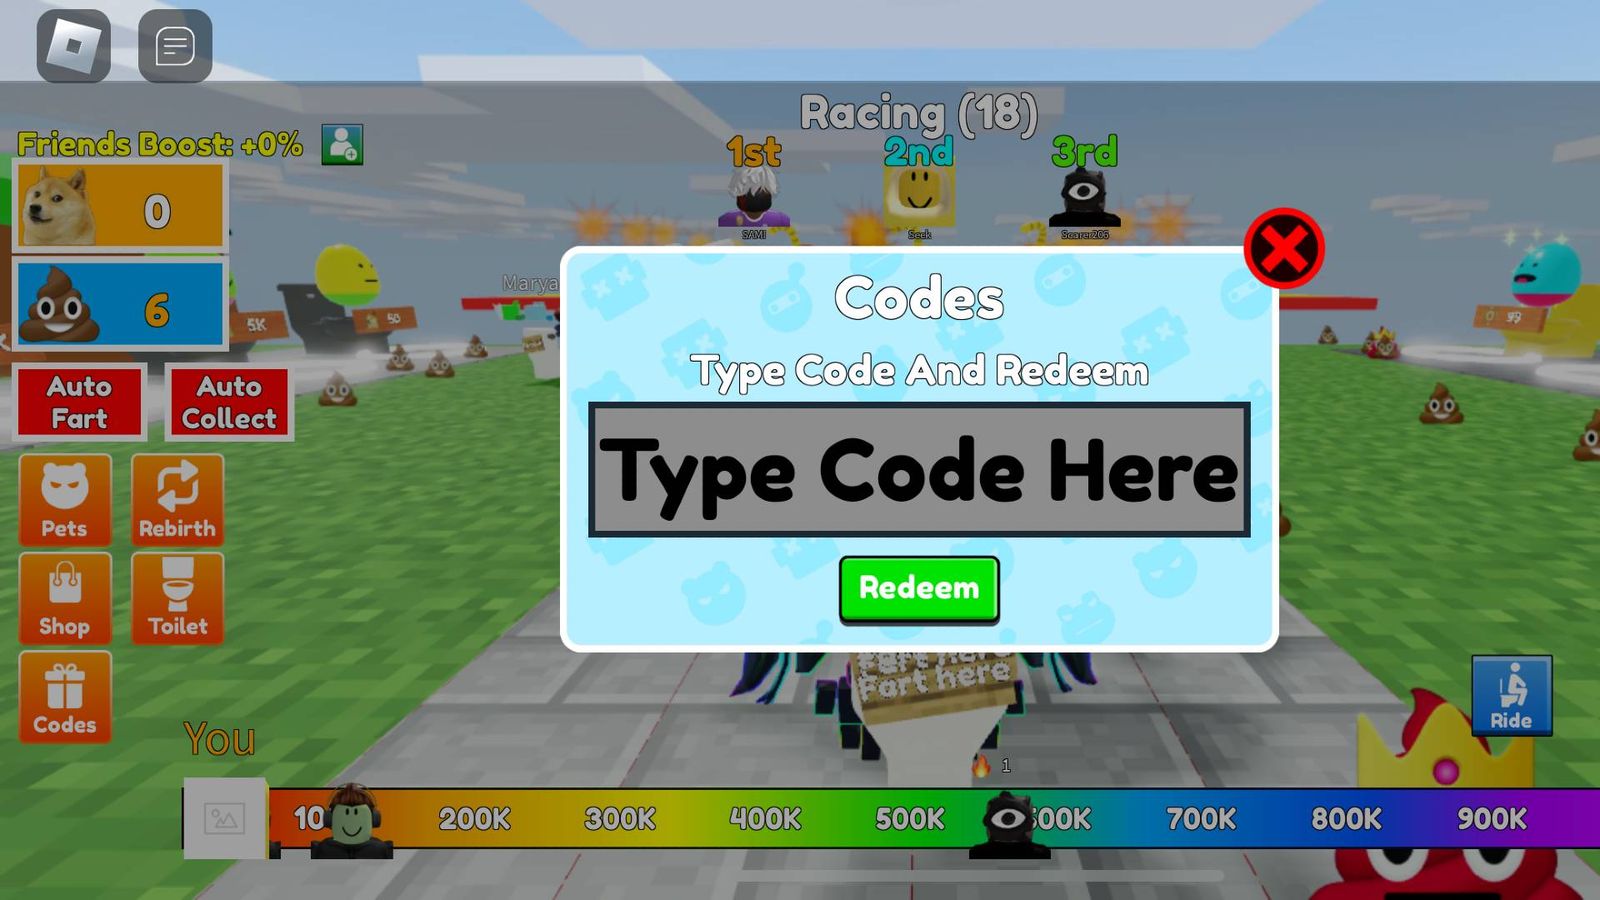 Image of the code redemption menu in Fart Race on Roblox.